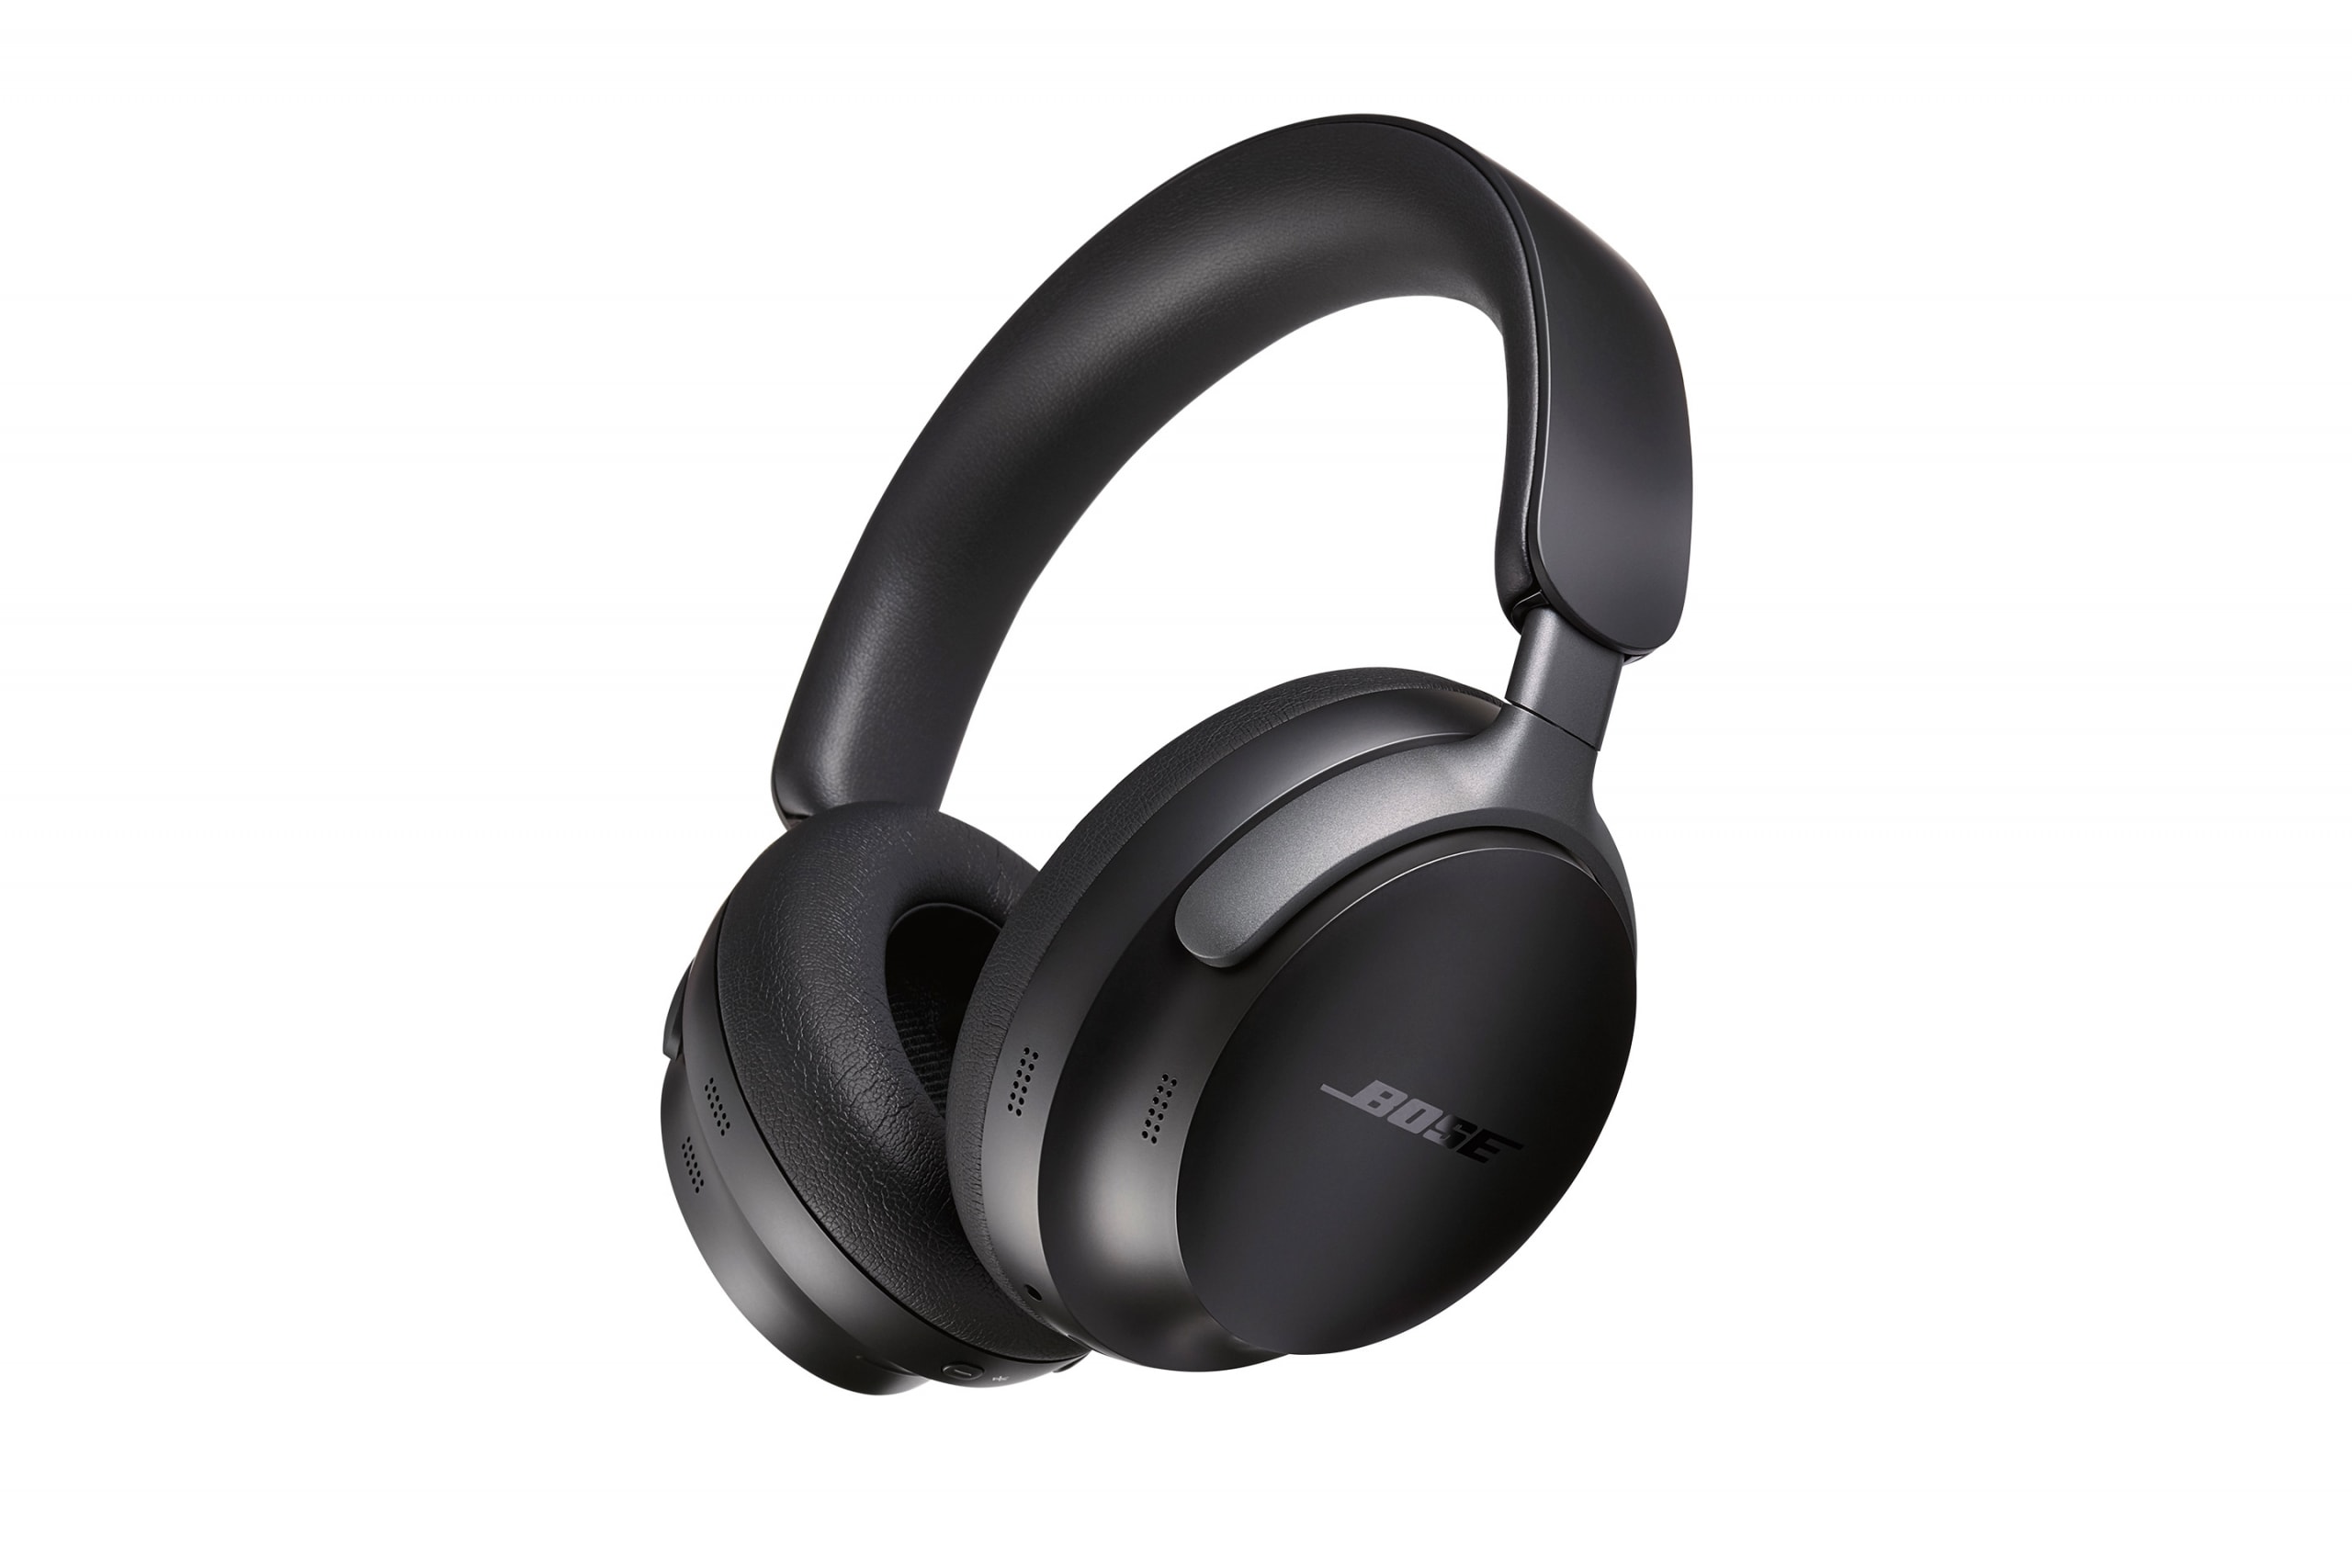 Bose launches its latest set of wireless noise-canceling